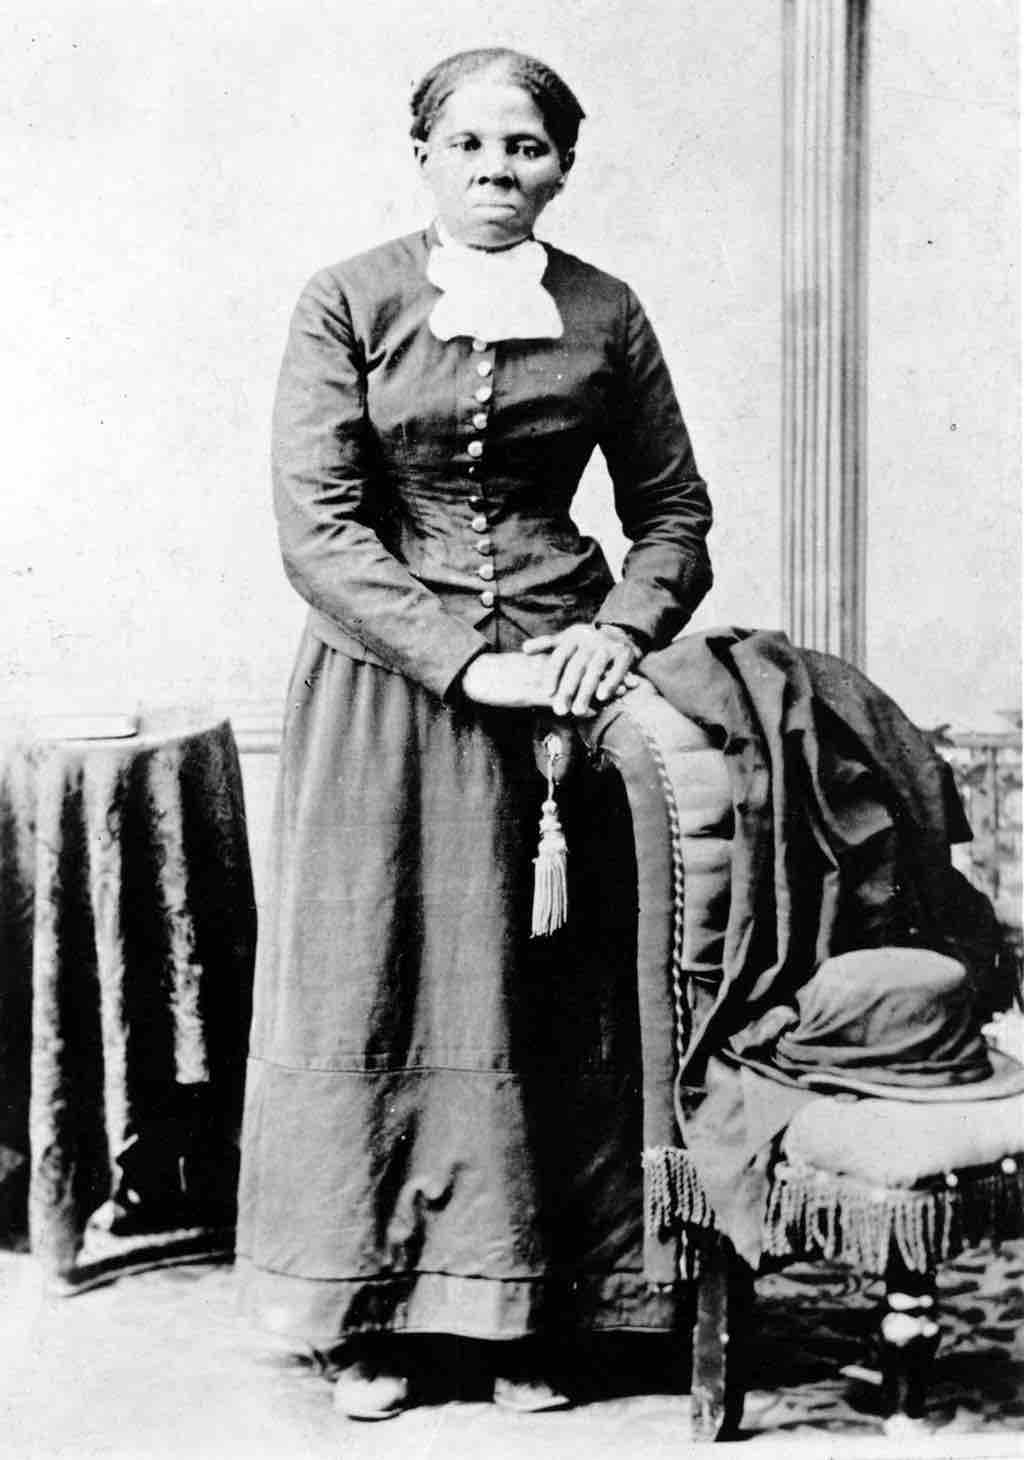 Harriet Tubman (photo by H.B. Lindsley), ca. 1870.